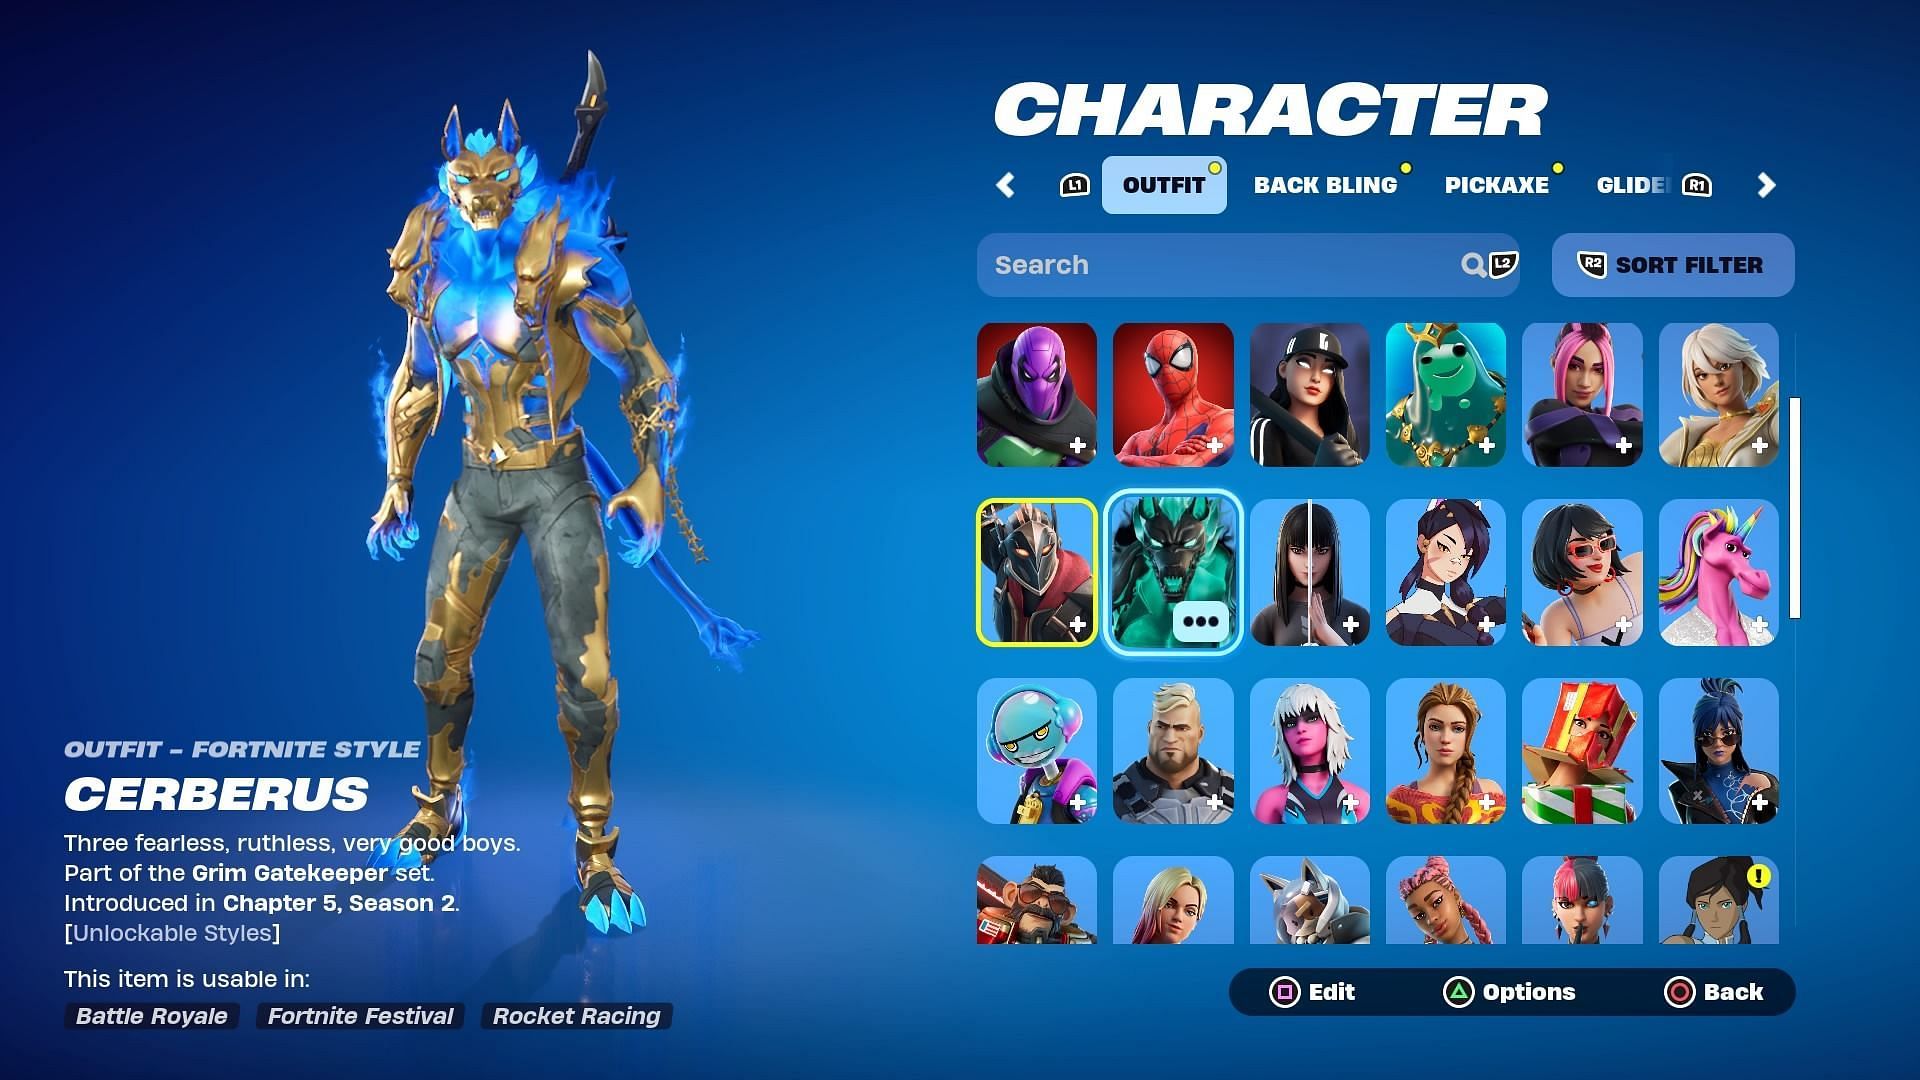 &ldquo;I hate the change so much&rdquo;: Fortnite community has a tough time sorting through locker due to rarity being removed